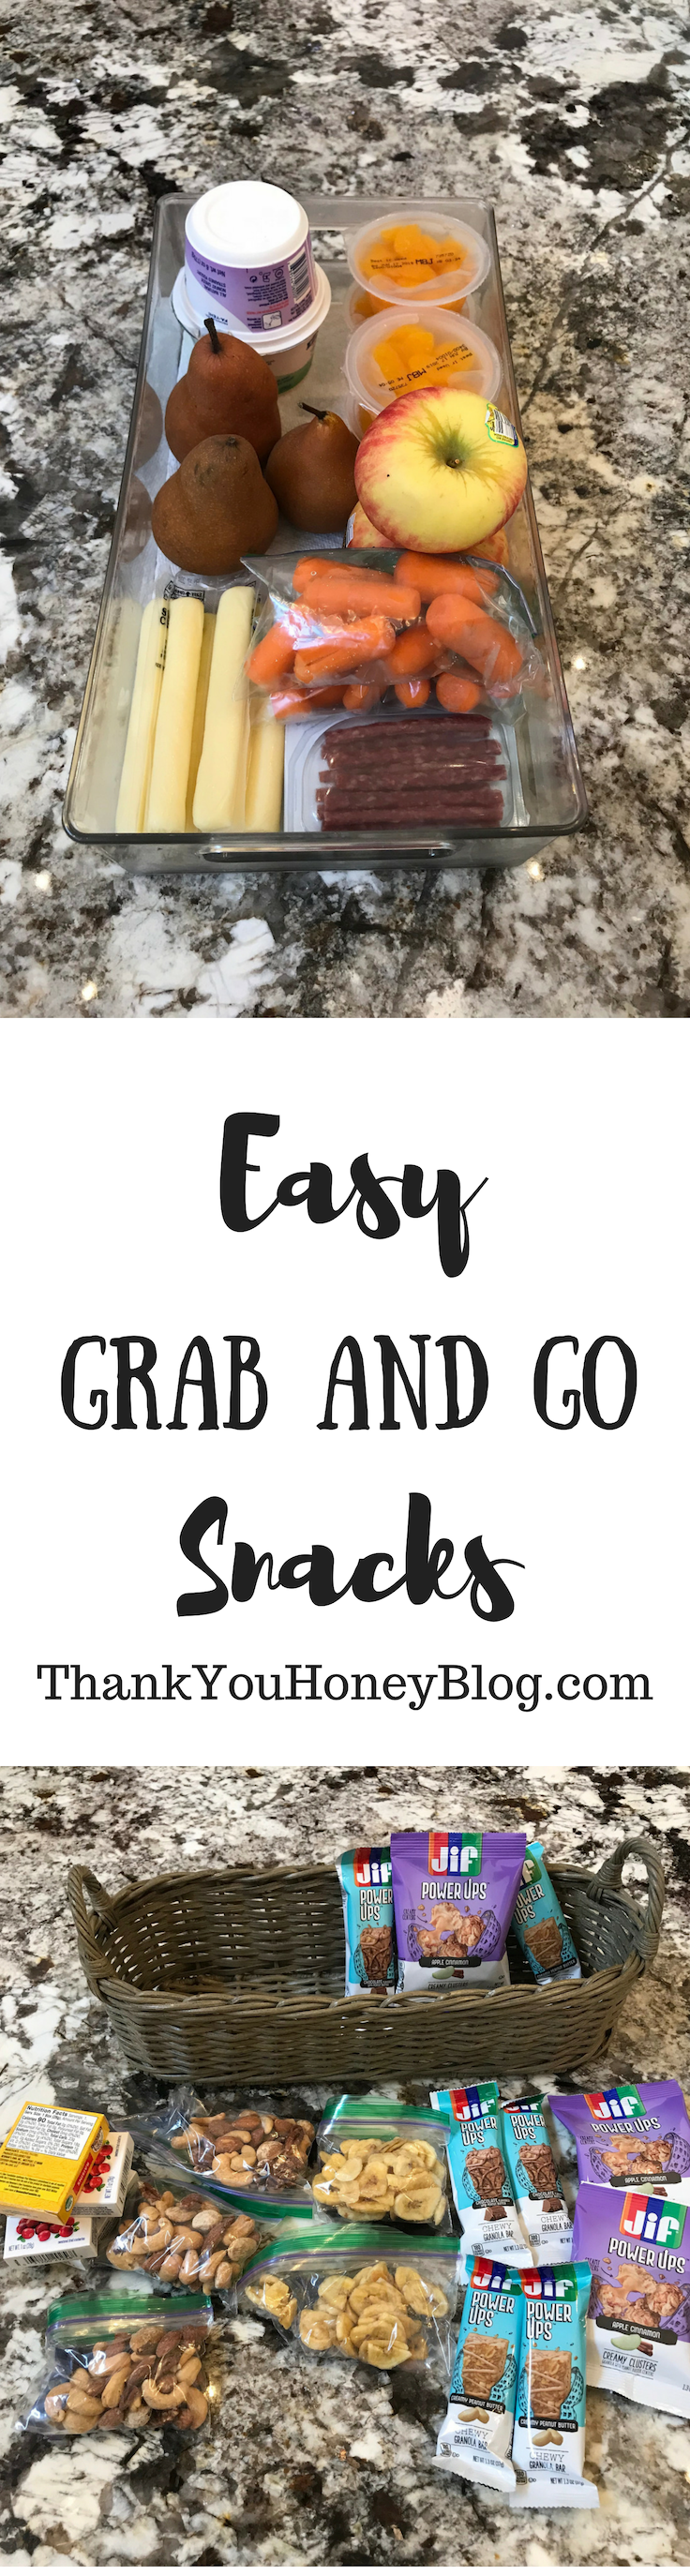 Easy Grab and Go Snacks